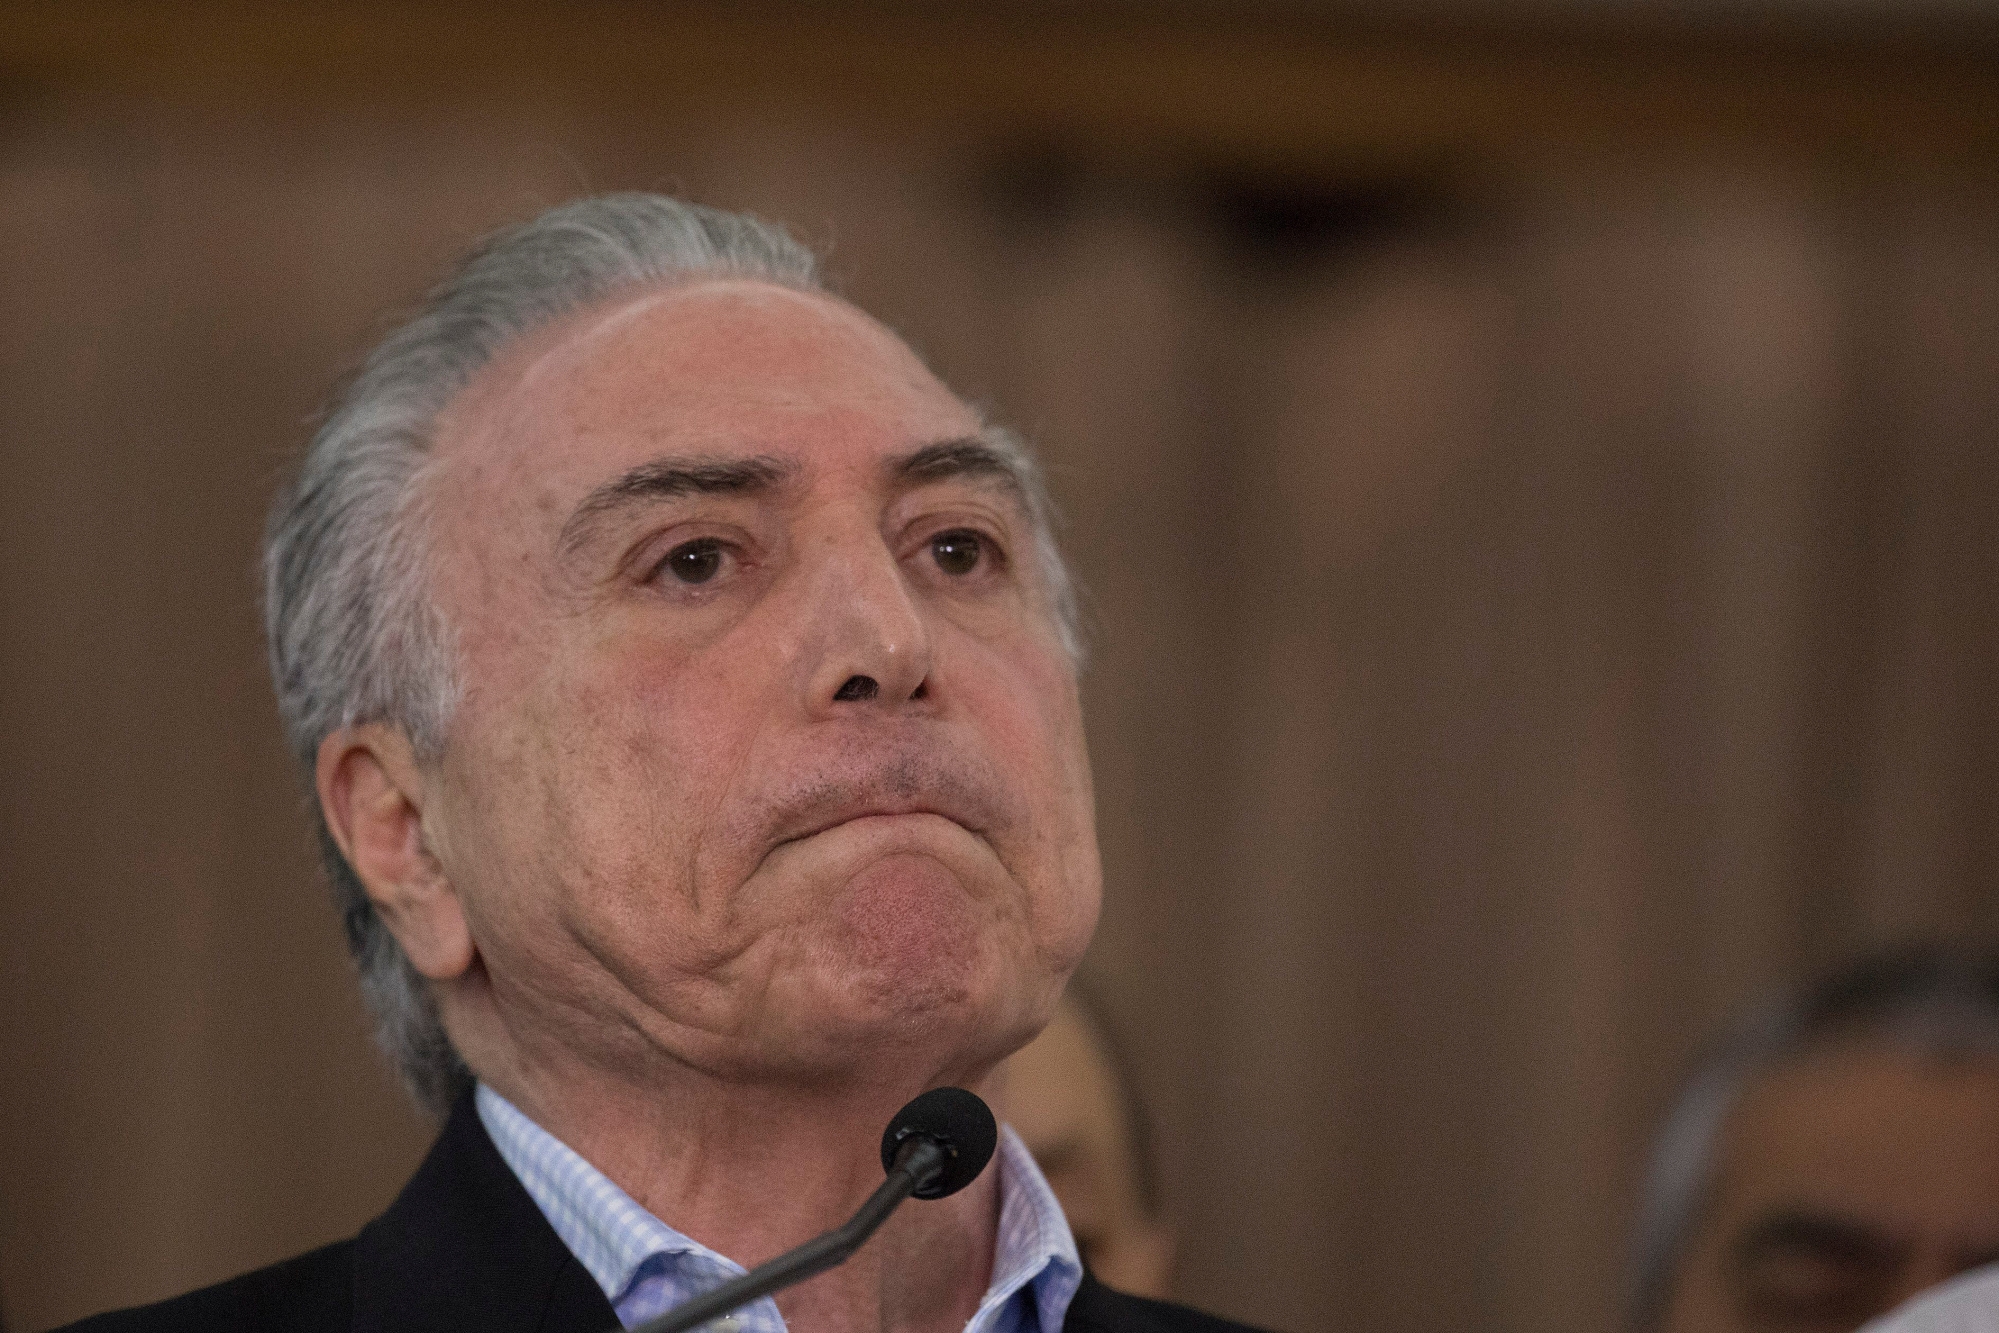 Brazil's president Michel Temer speaks to the press during his visit to the operations control center at the Army's headquarters in Rio de Janeiro, Brazil, Sunday, July. 30, 2017. Thousands of soldiers began patrolling Rio de Janeiro amid a spike in violence in Brazil's second-largest city. (AP Photo/Leo Correa) Brazil Security